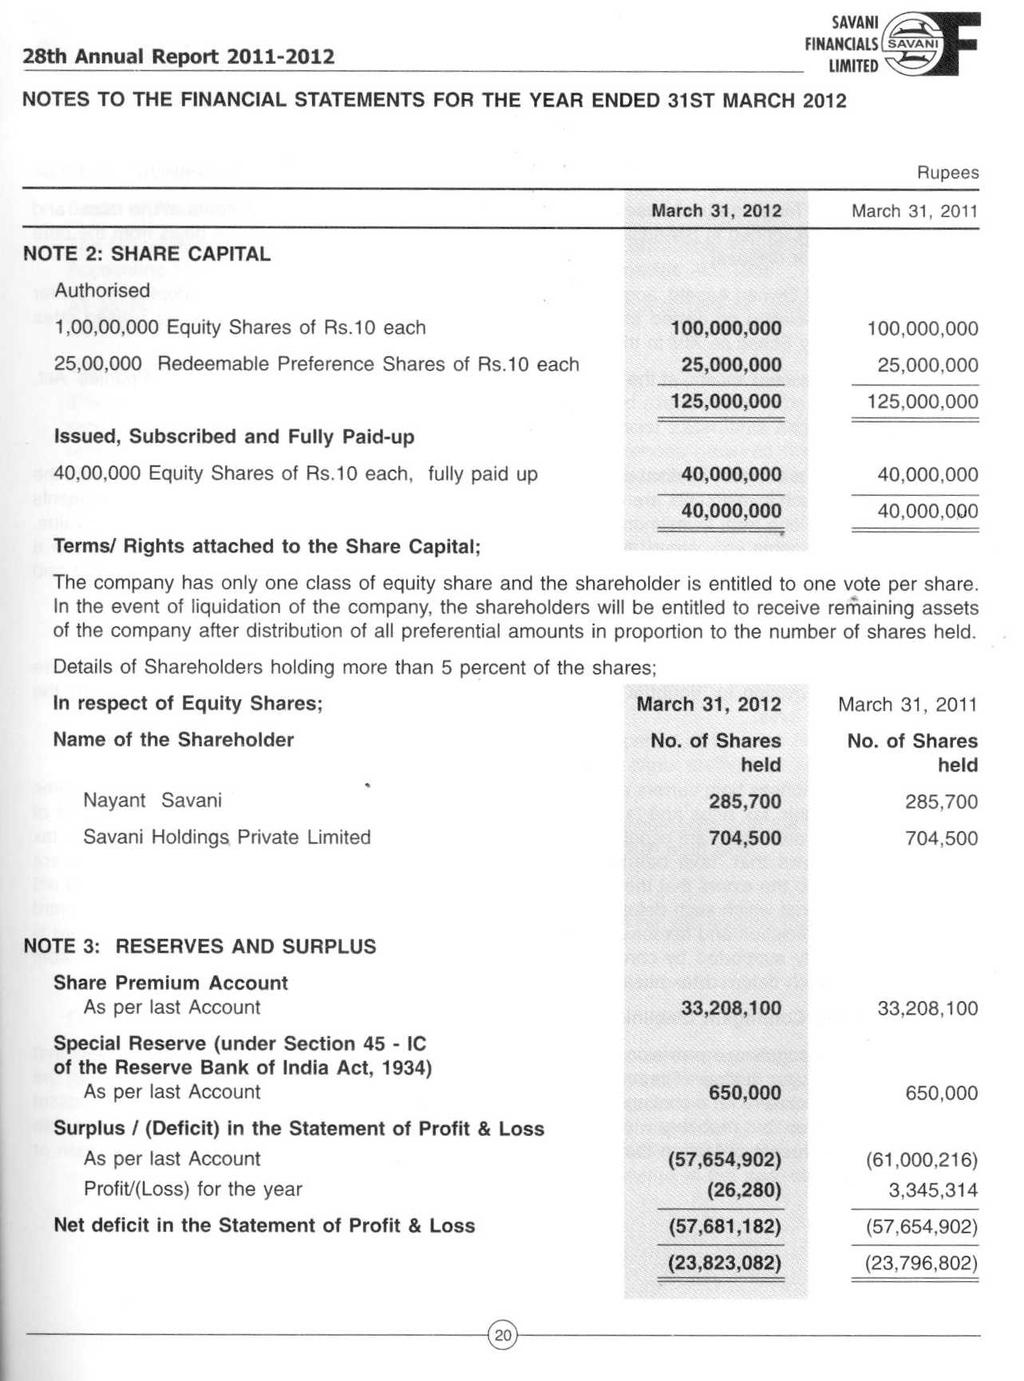 NOTES TO THE FINANCIAL STATEMENTS FOR THE YEAR ENDED 31ST MARCH 2012 Rupees March 31, 2012 March 31, 2011 NOTE 2 : SHARE CAPITAL Authorised 1,00,00,000 Equity Shares of Rs.